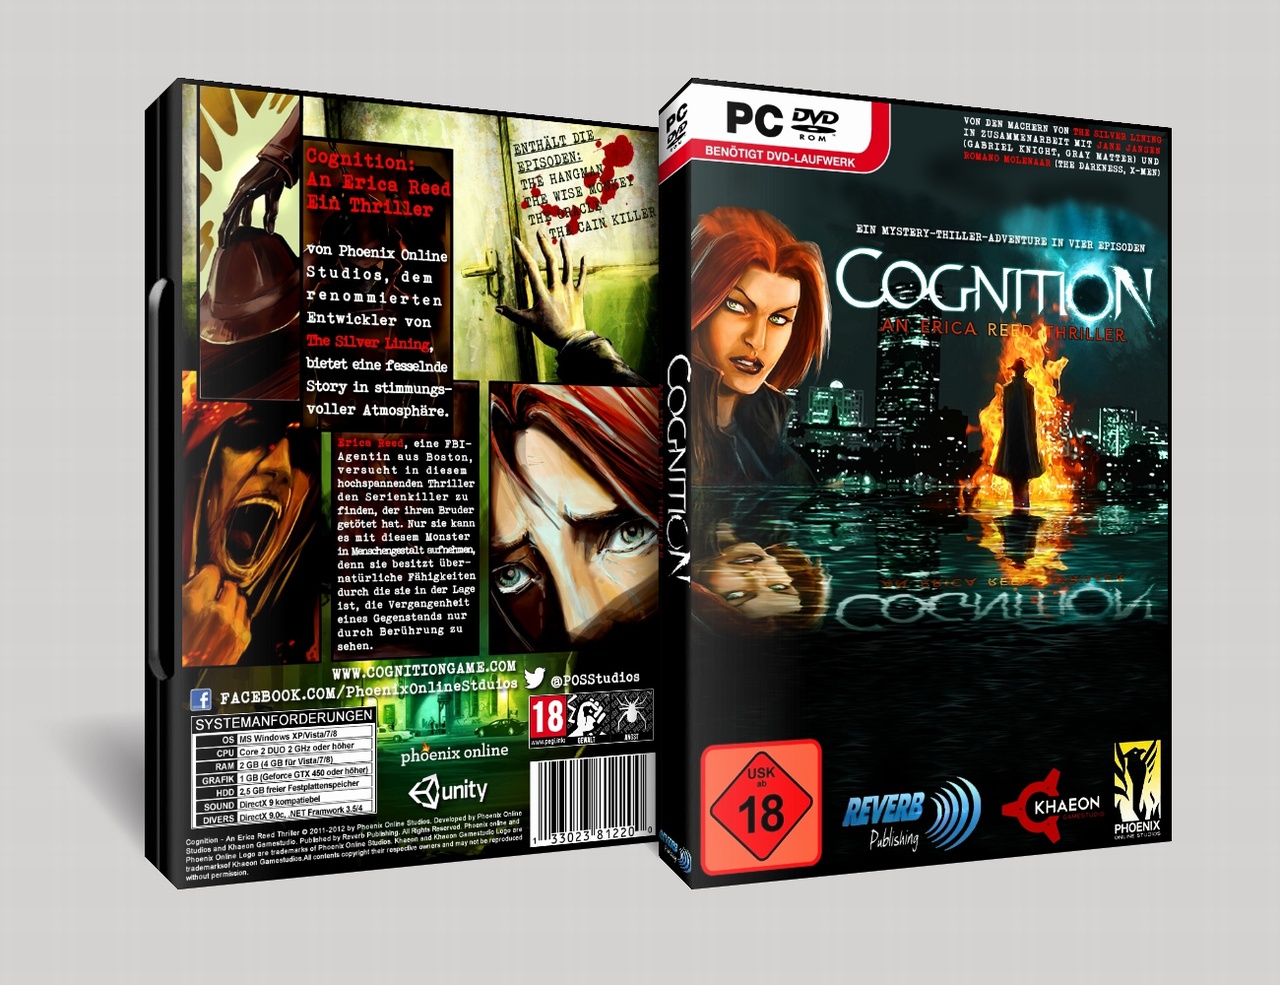 Cognition: An Erica Reed Thriller box cover